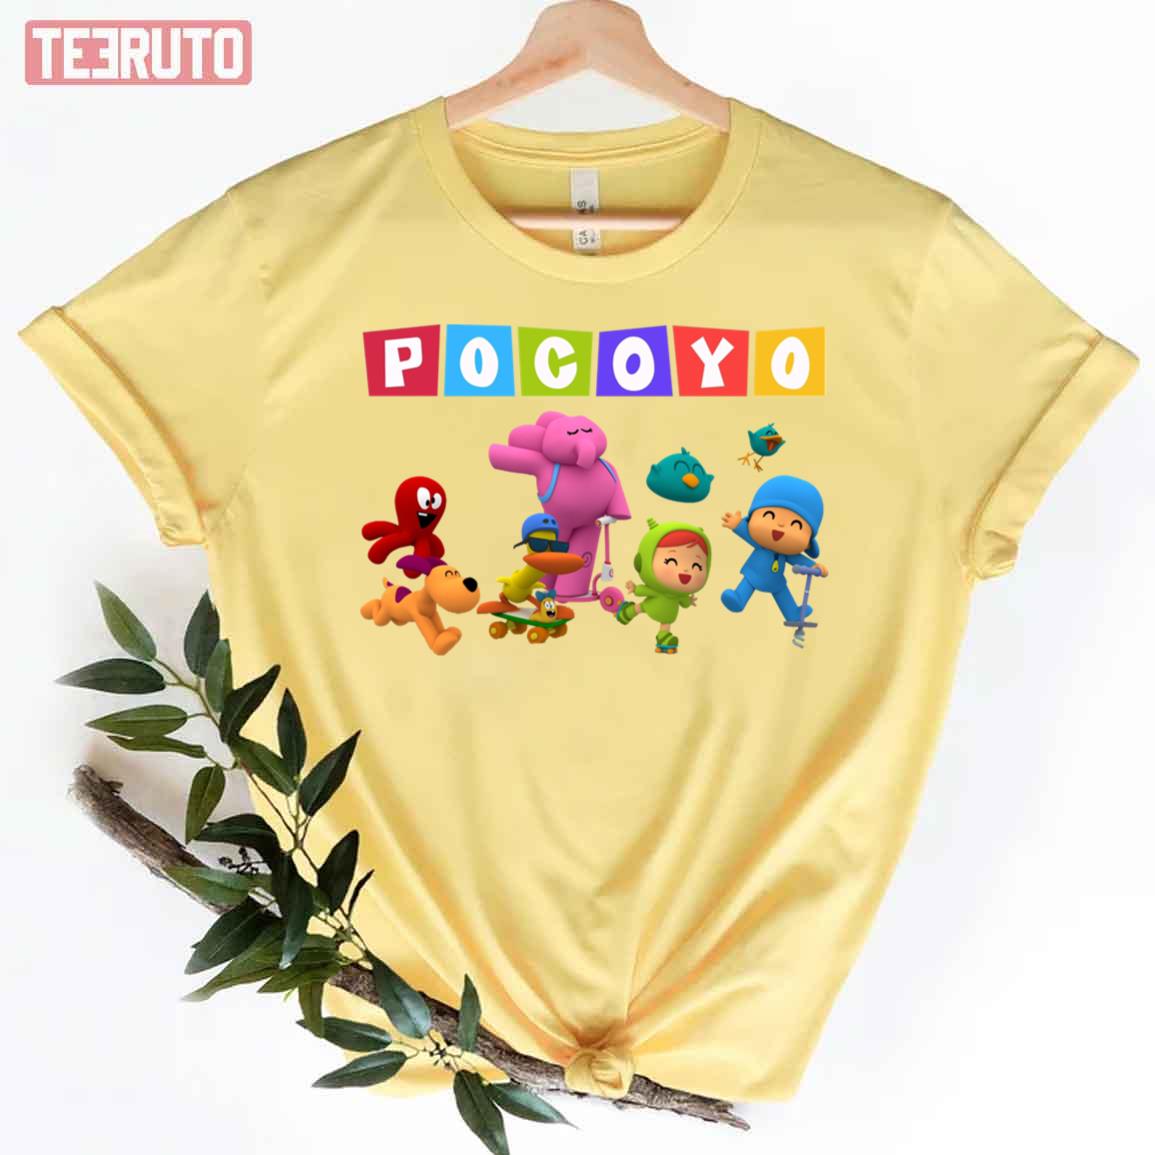 Playing Together Pocoyo Friends Unisex T-Shirt